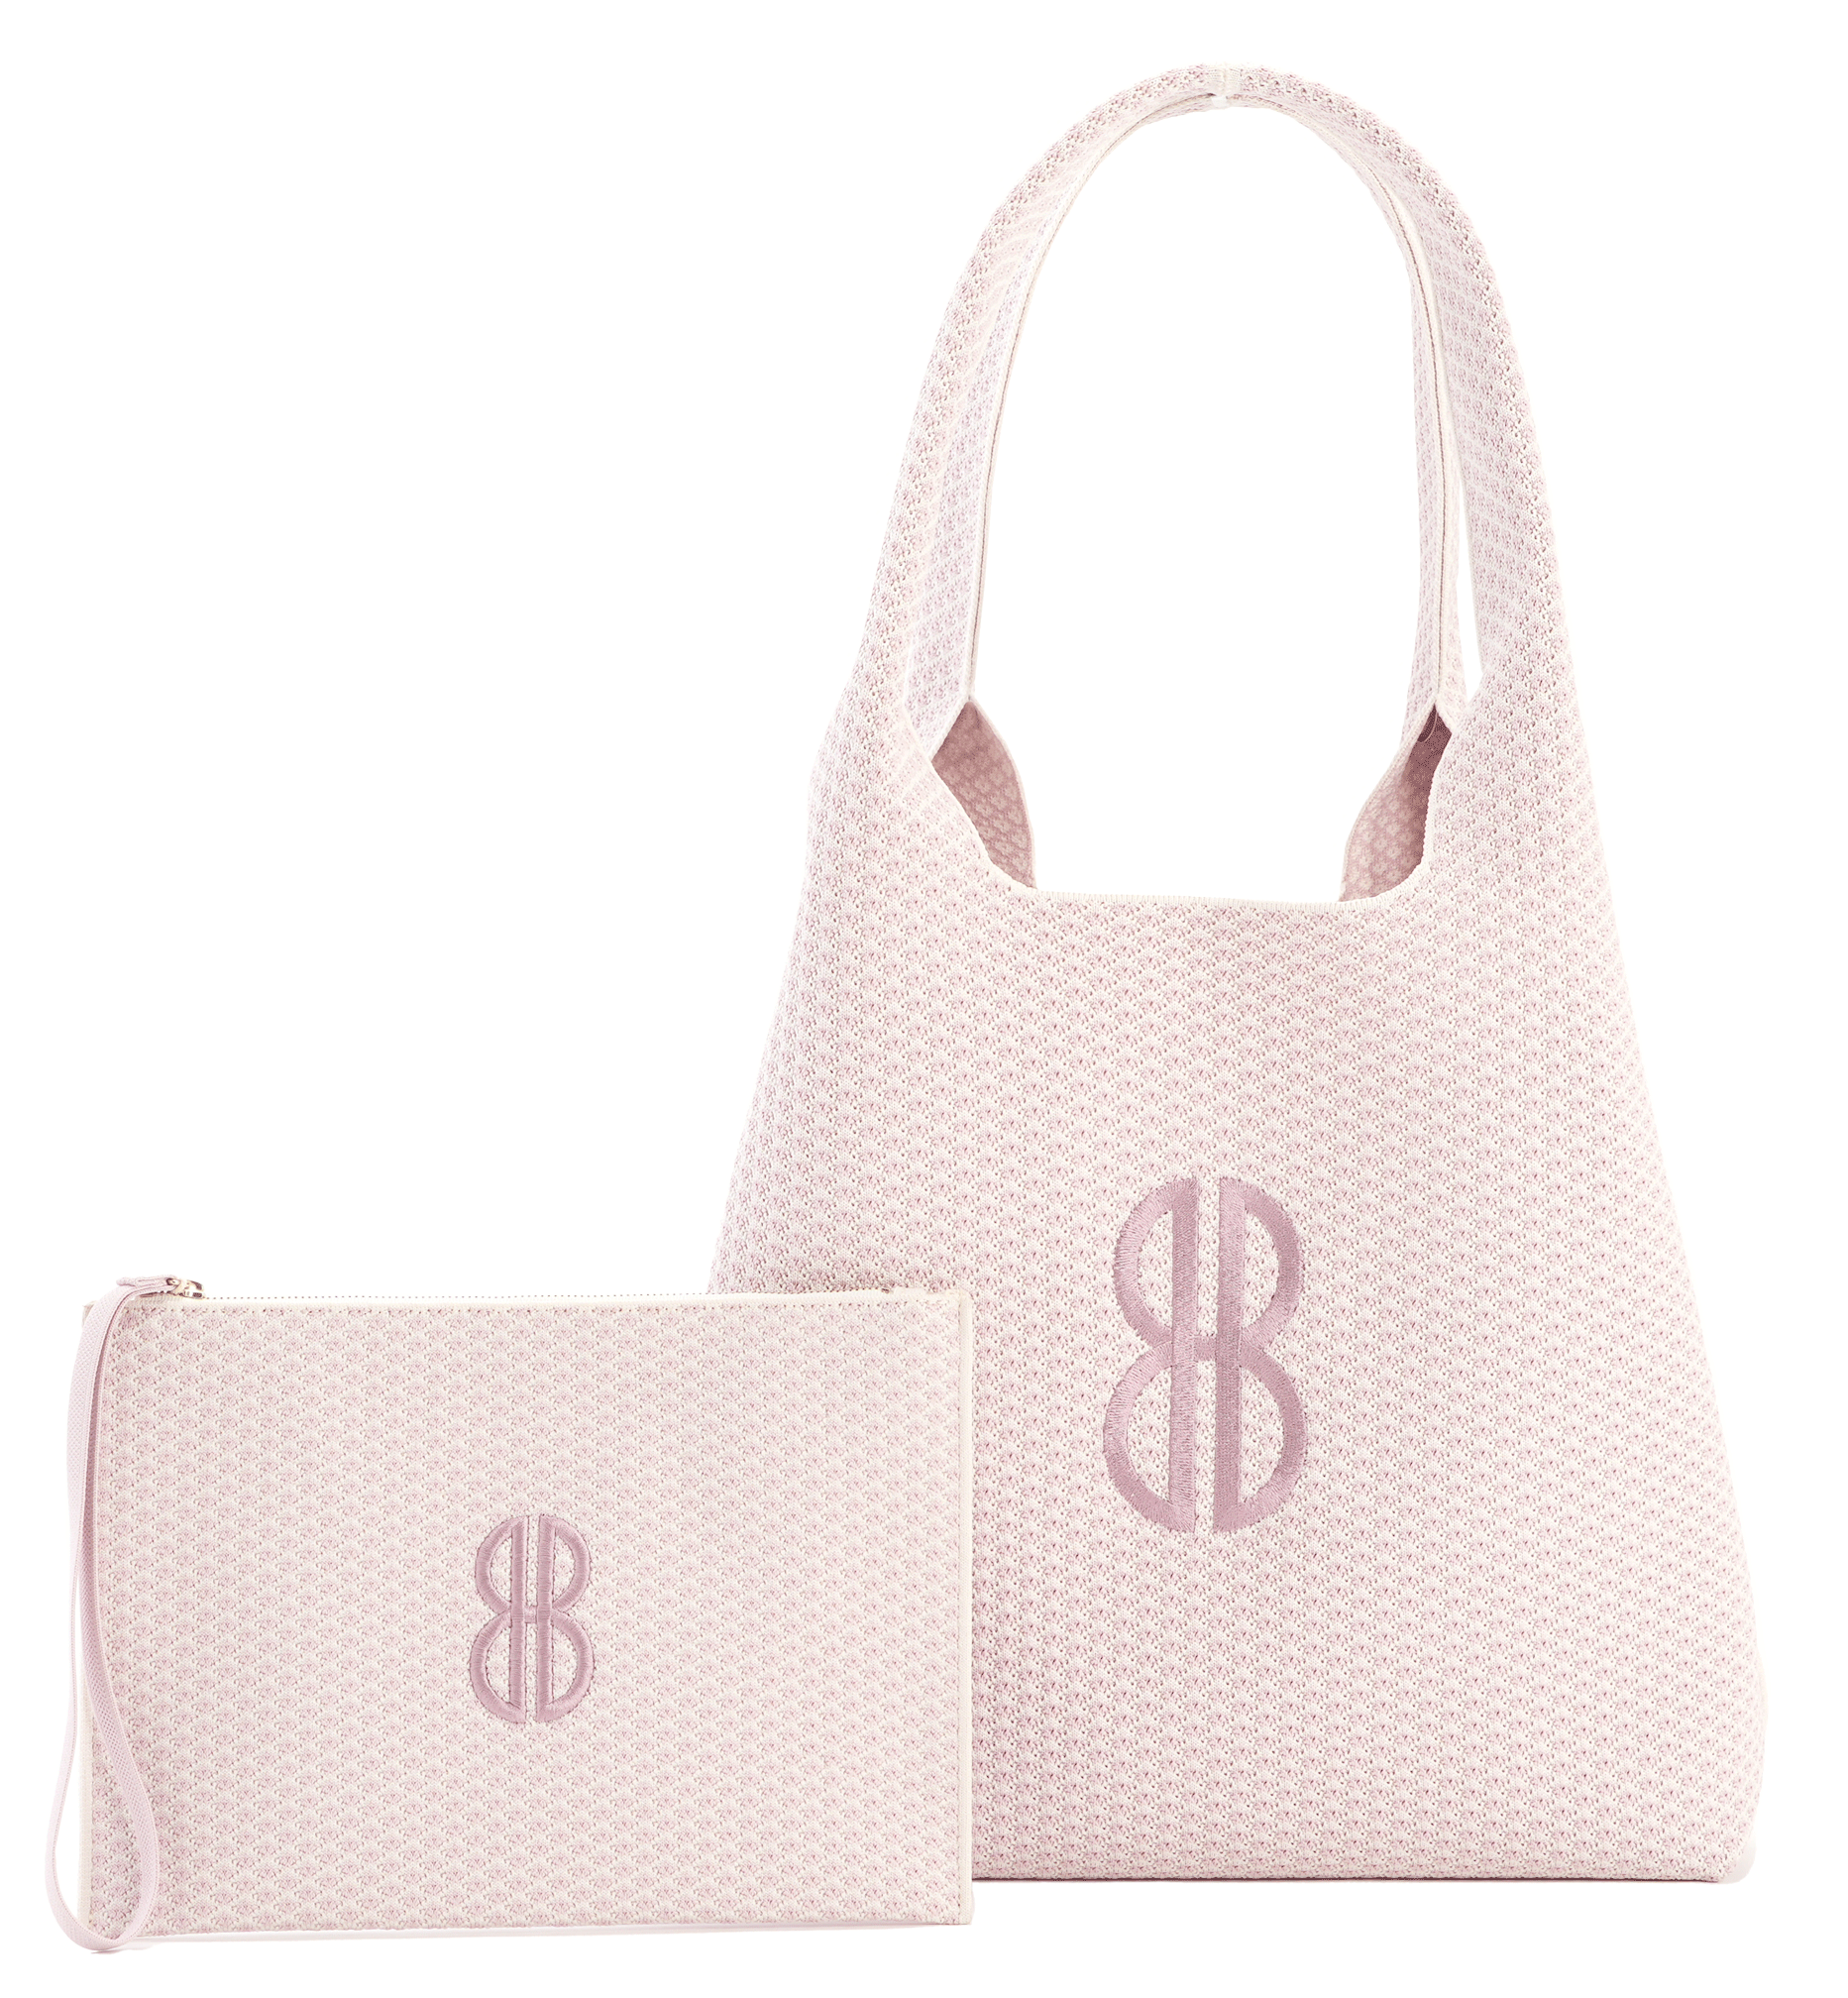 CLEAR TOTE BAG MONOGRAM EDITION - PINK